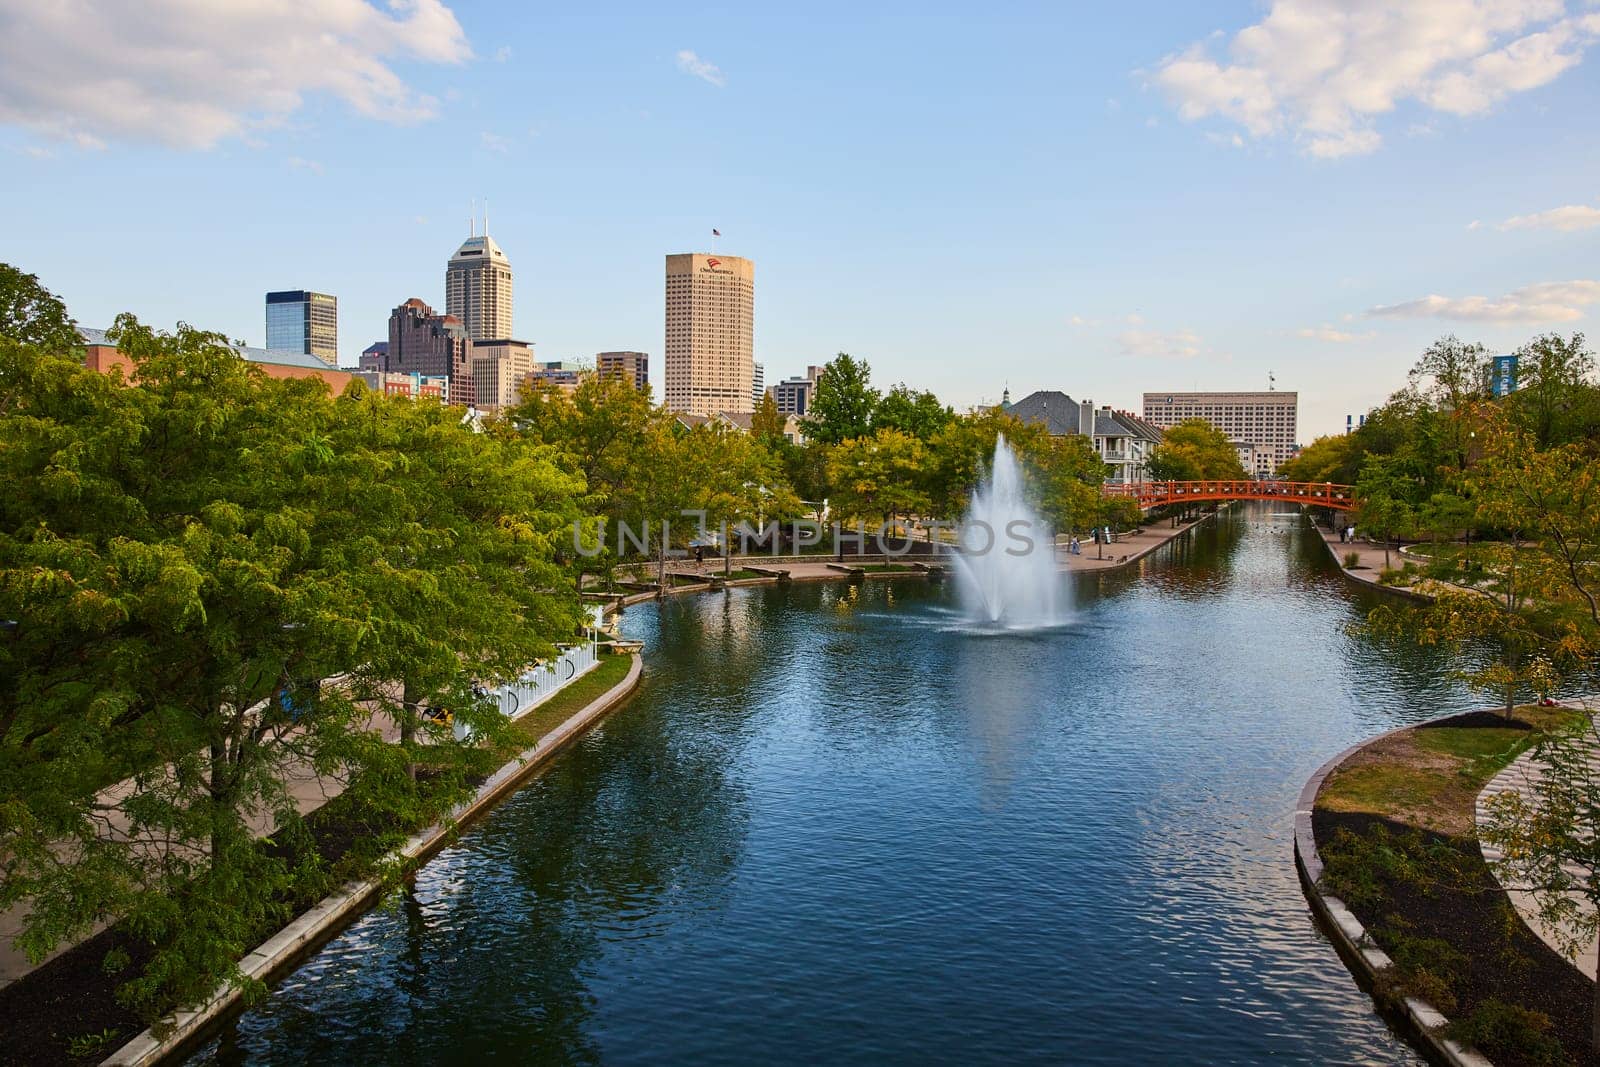 Indianapolis Urban Park with Fountain and City Skyline by njproductions